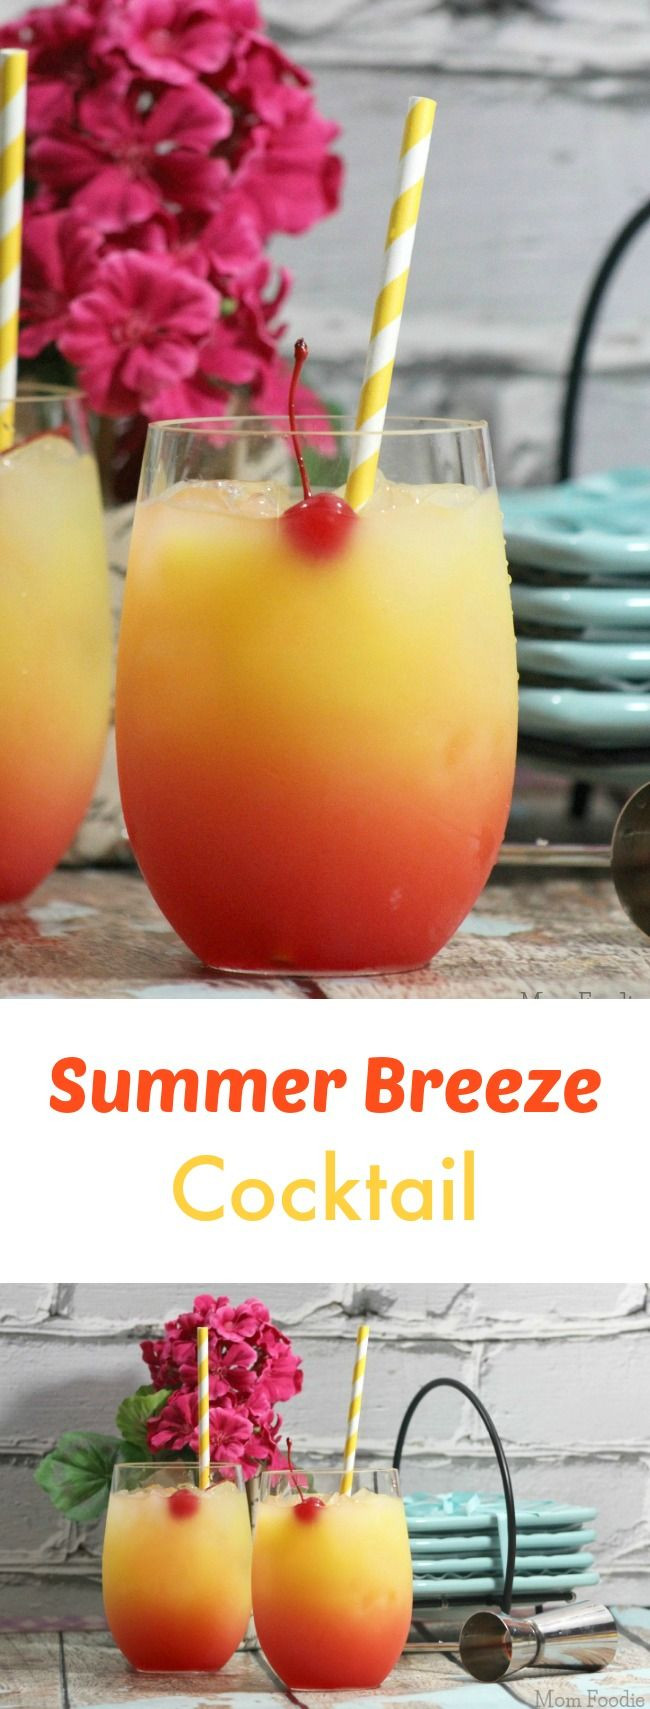 Summer Cocktail Party Ideas
 Summer Breeze Cocktail Recipe great for parties